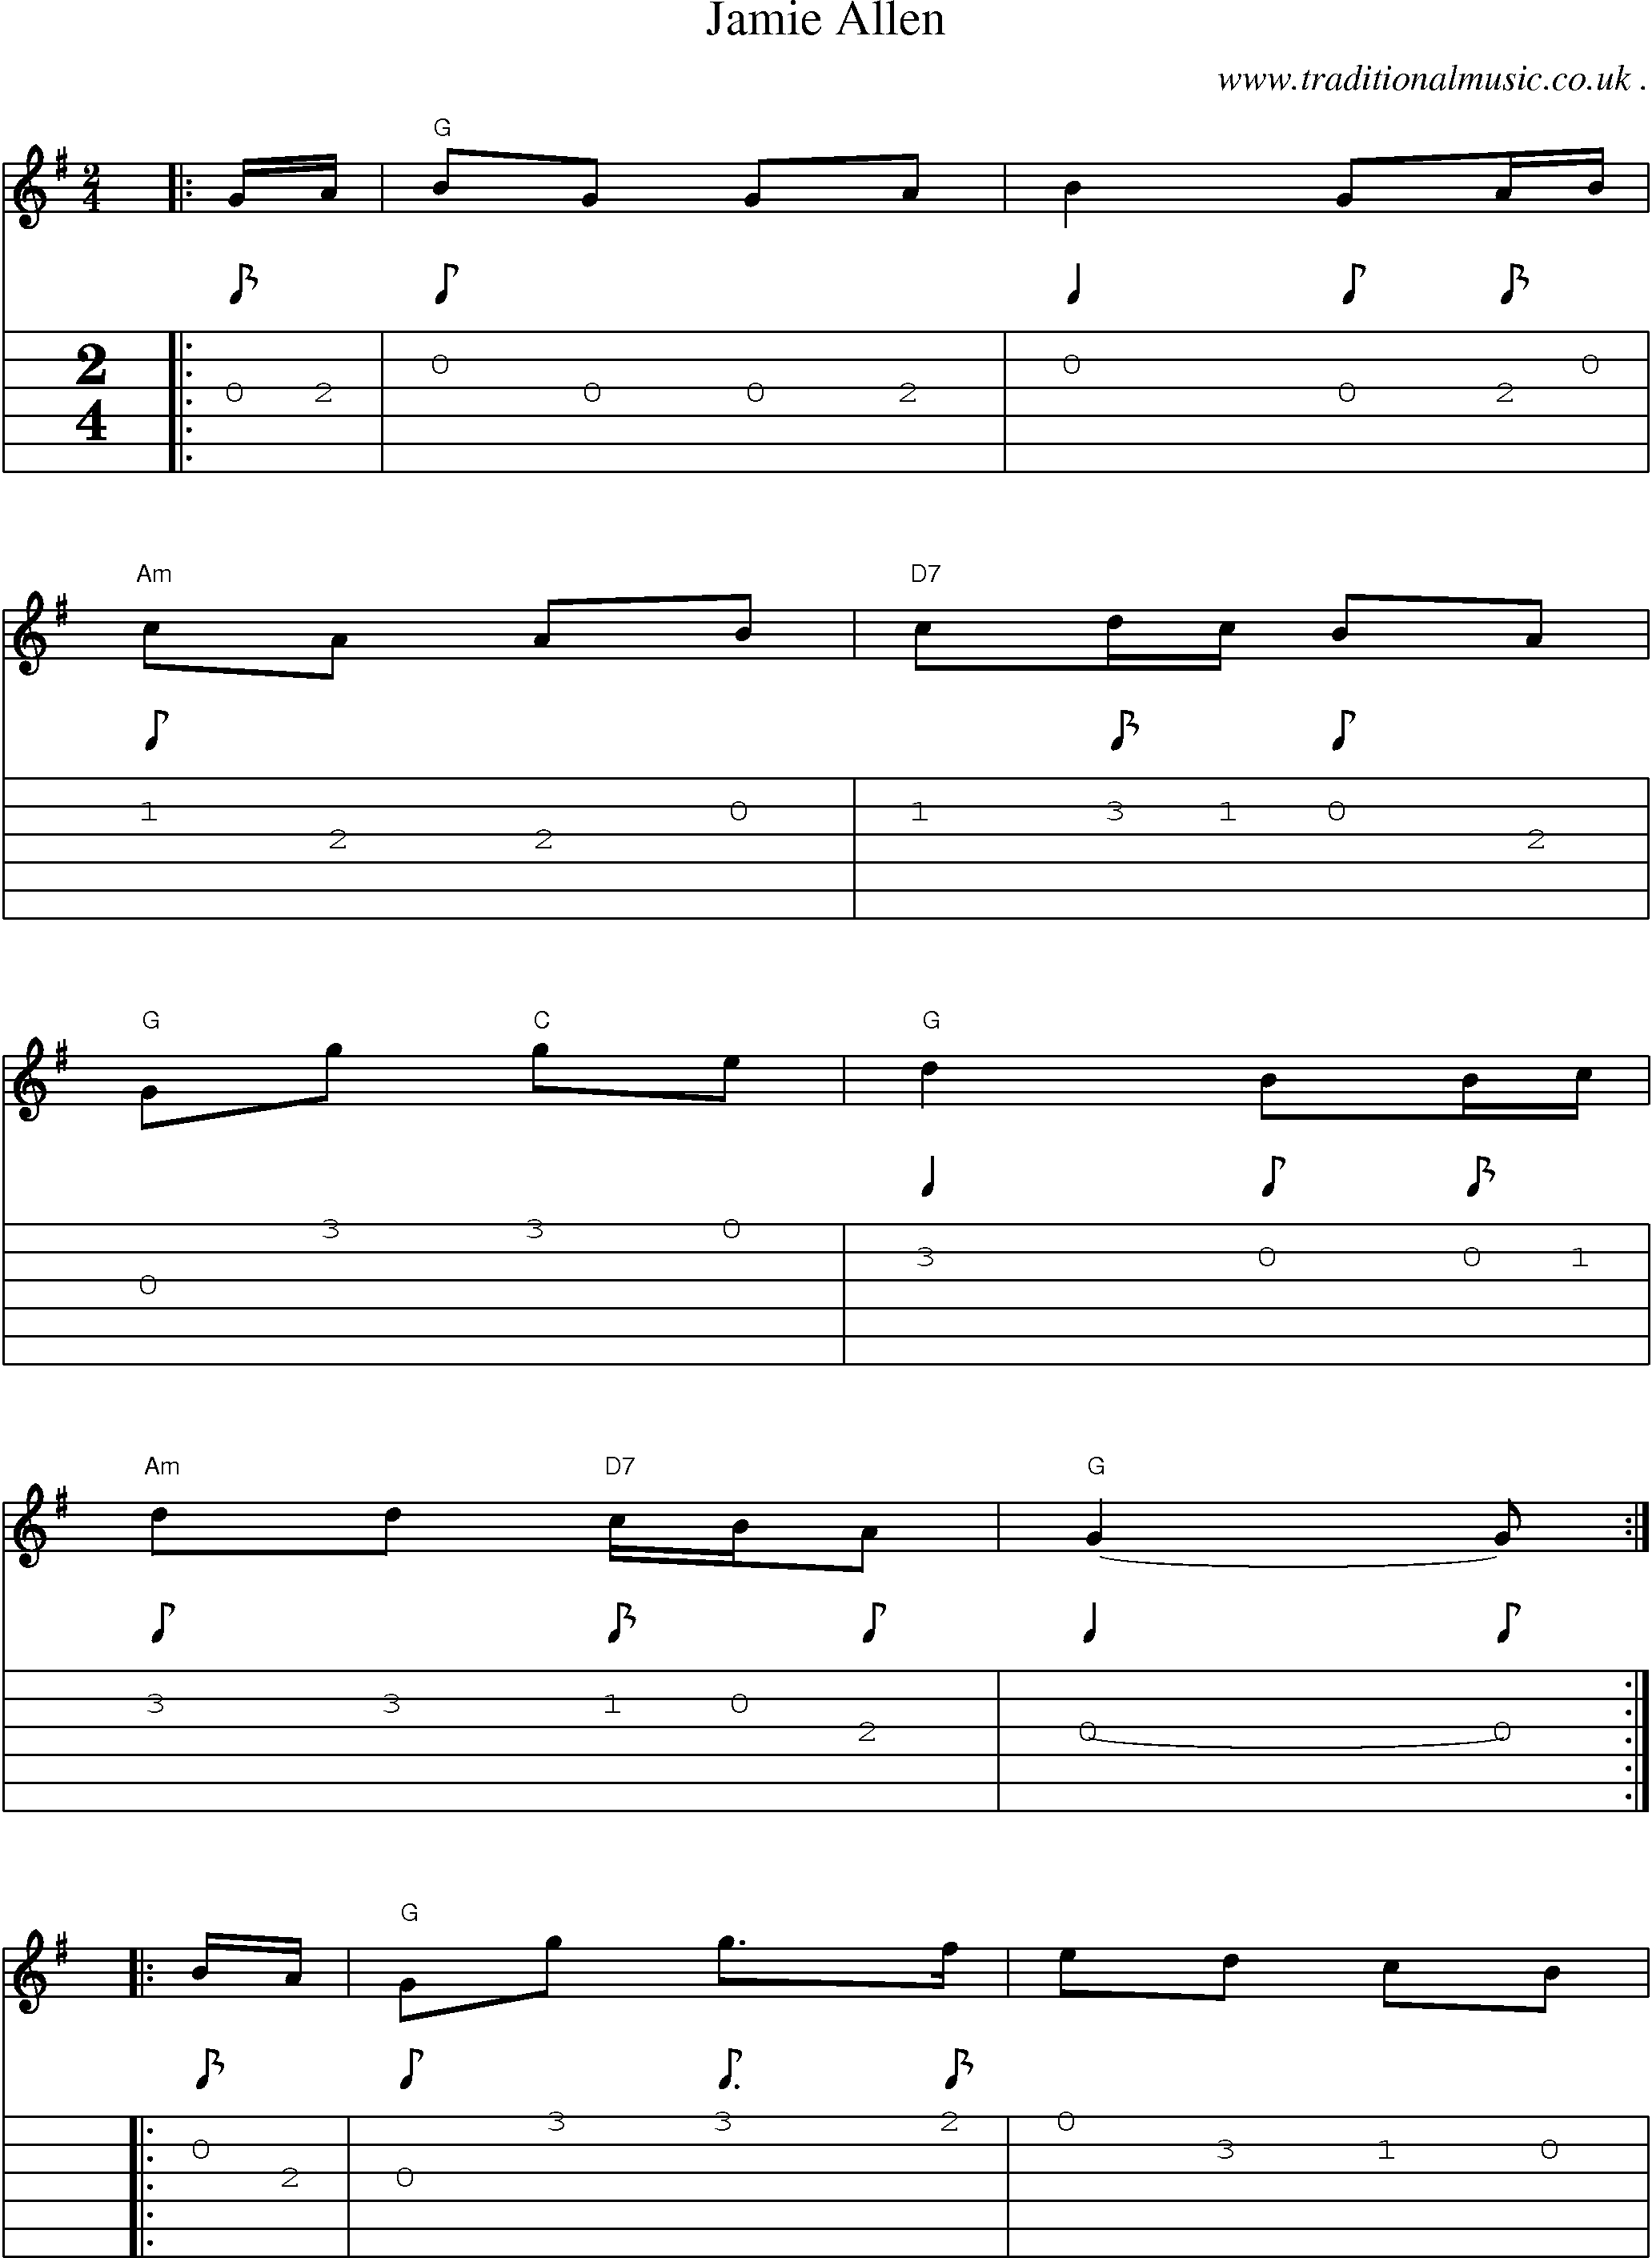 Music Score and Guitar Tabs for Jamie Allen